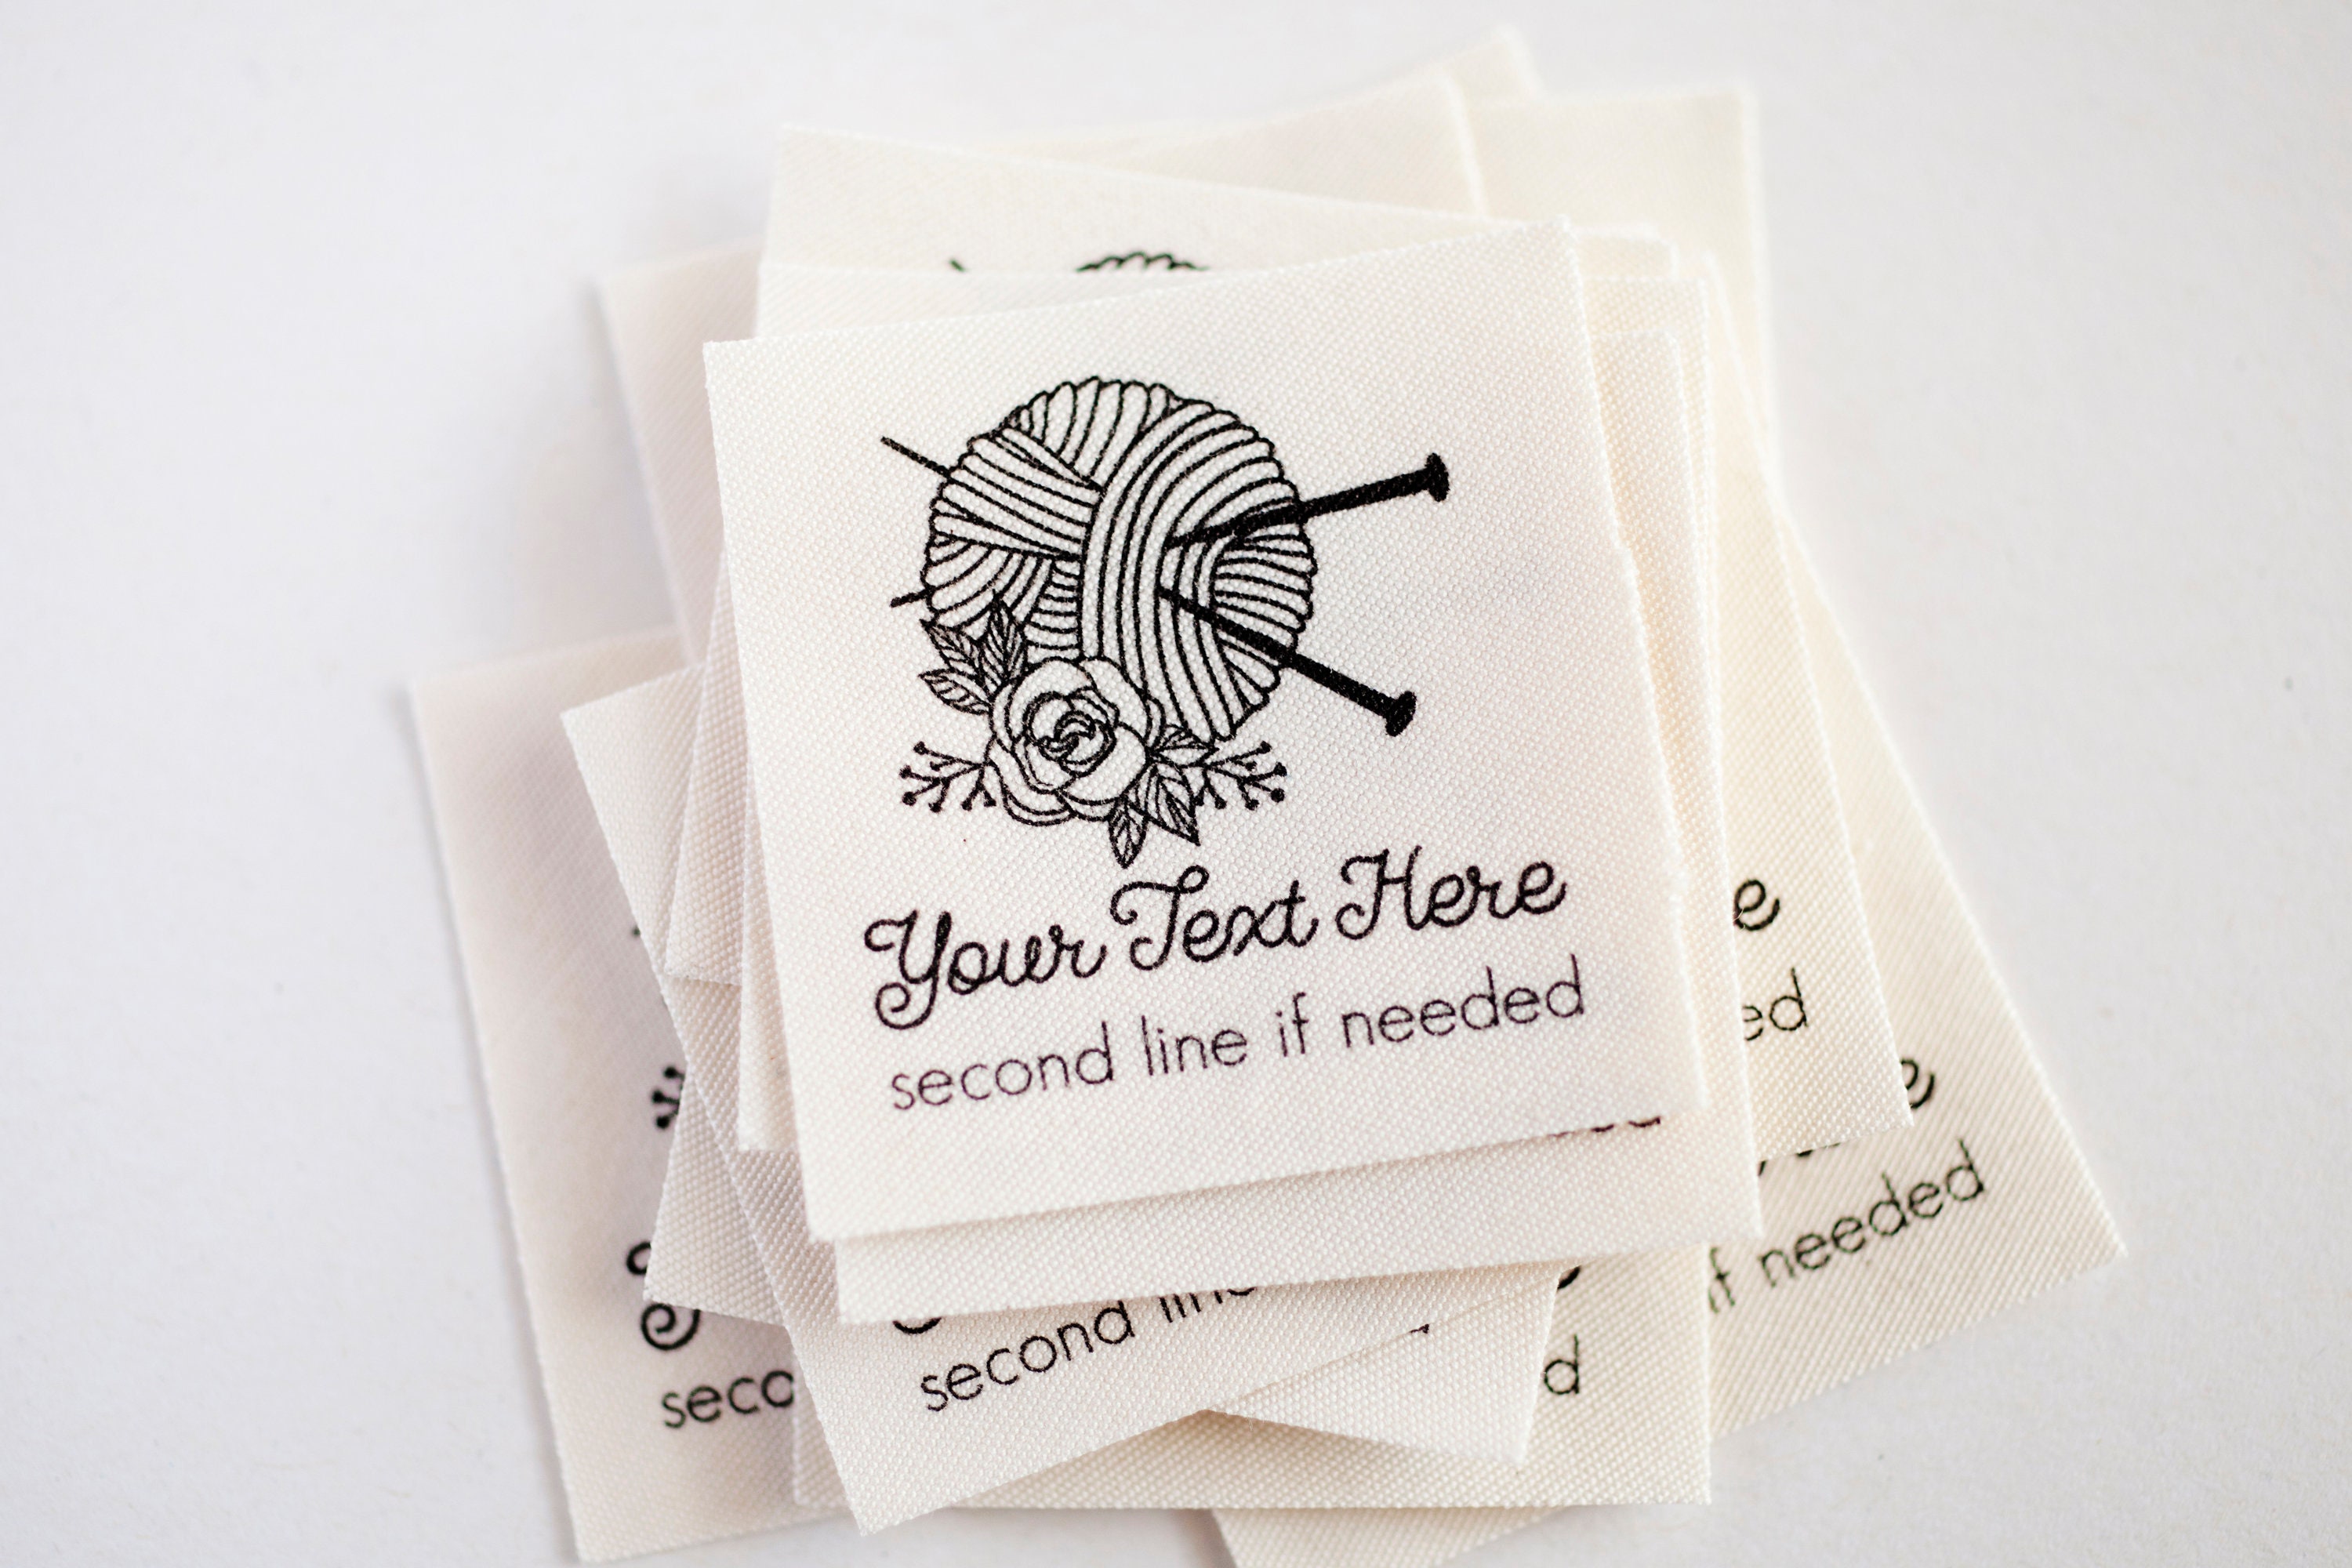 Personalized Knitting Labels, Fabric Tags for Handmade Items crochet or  Knitting Gift 